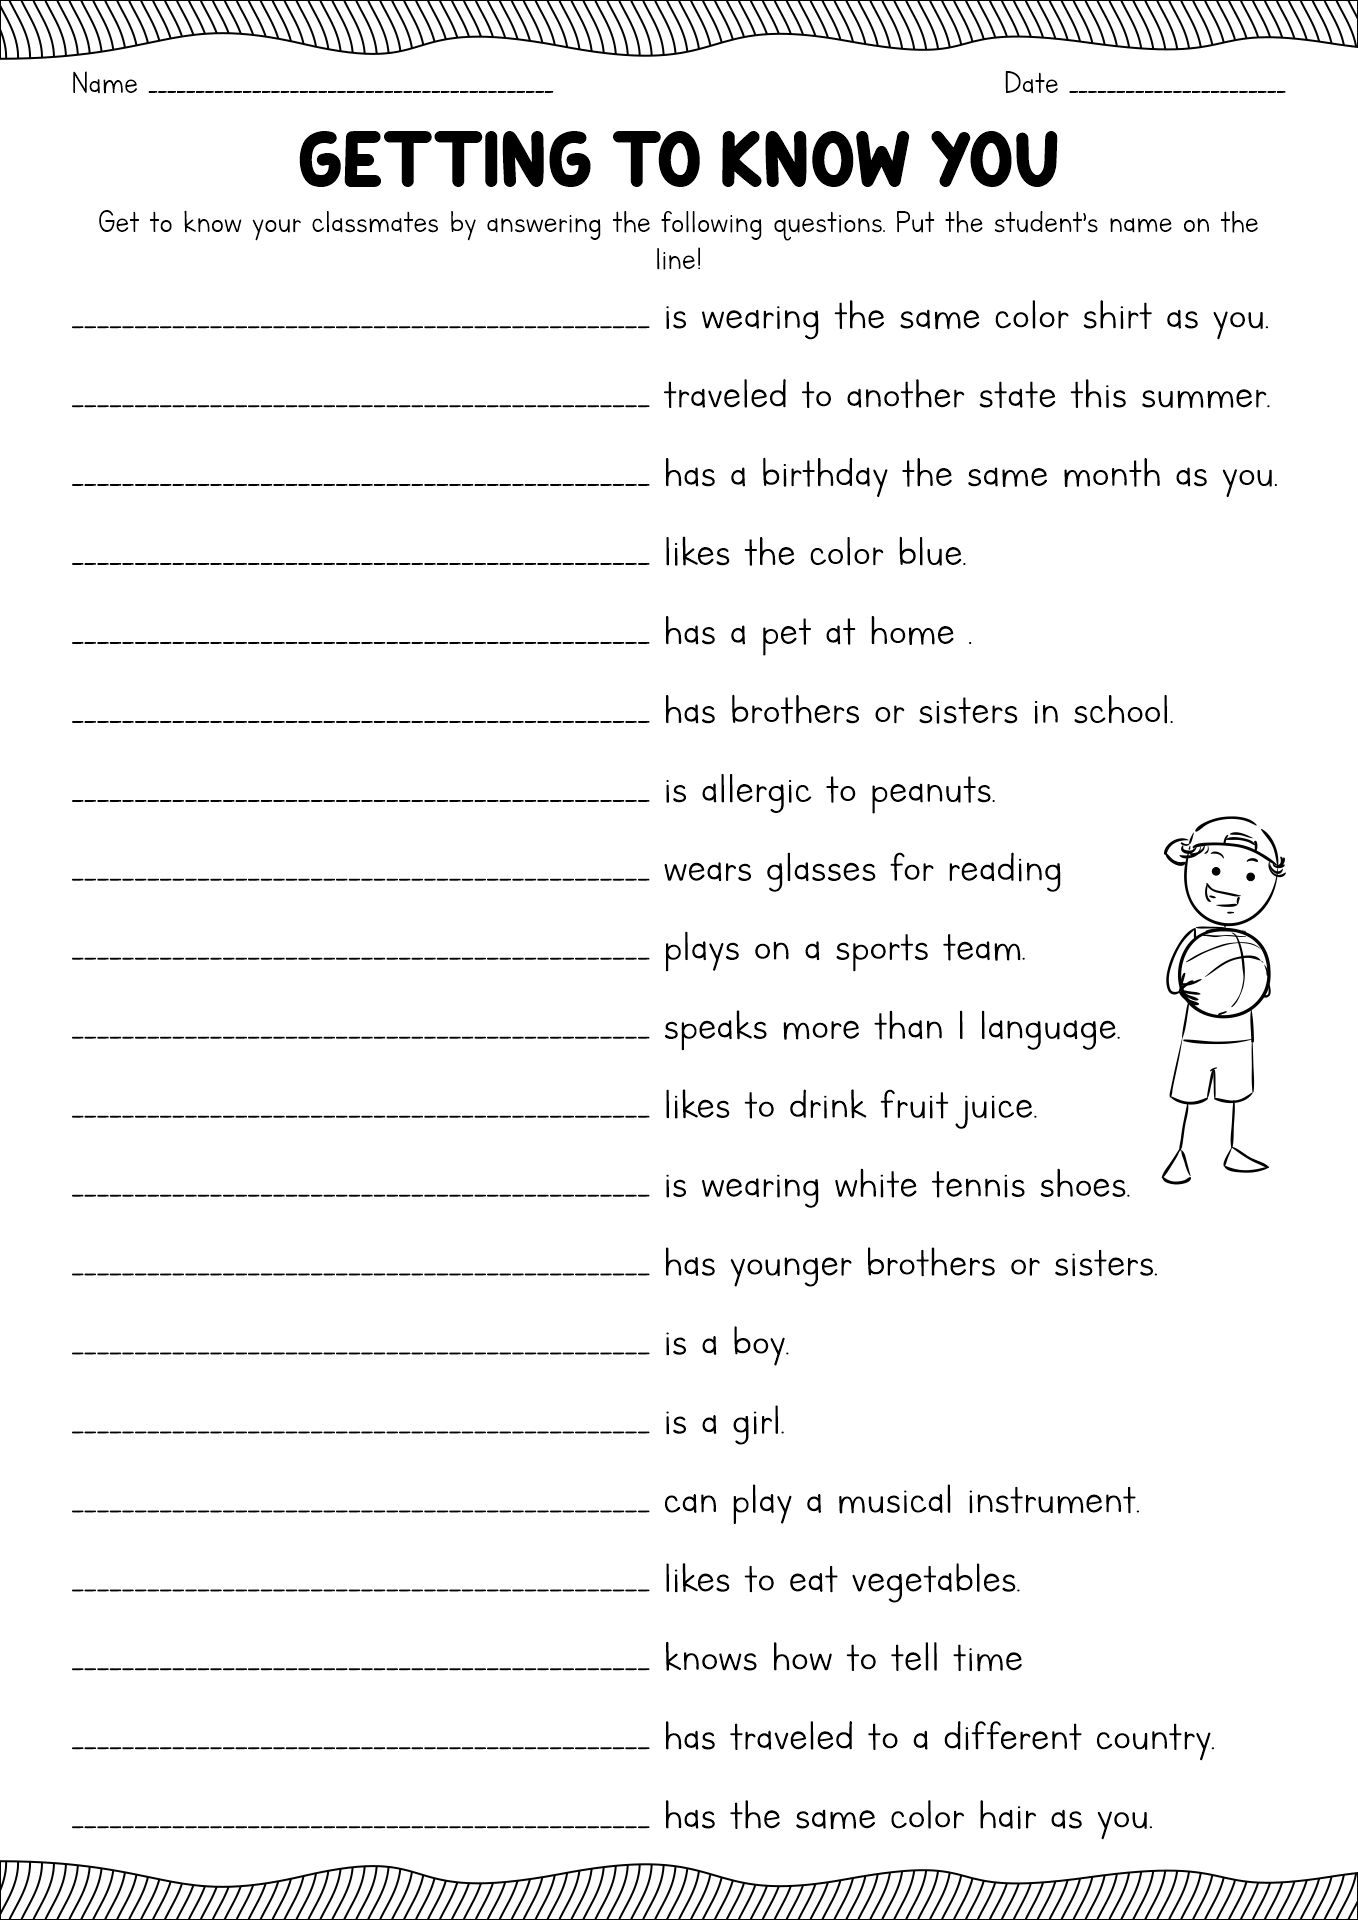 13 Best Images of Get To Know Me Worksheet Get to Know You Worksheet